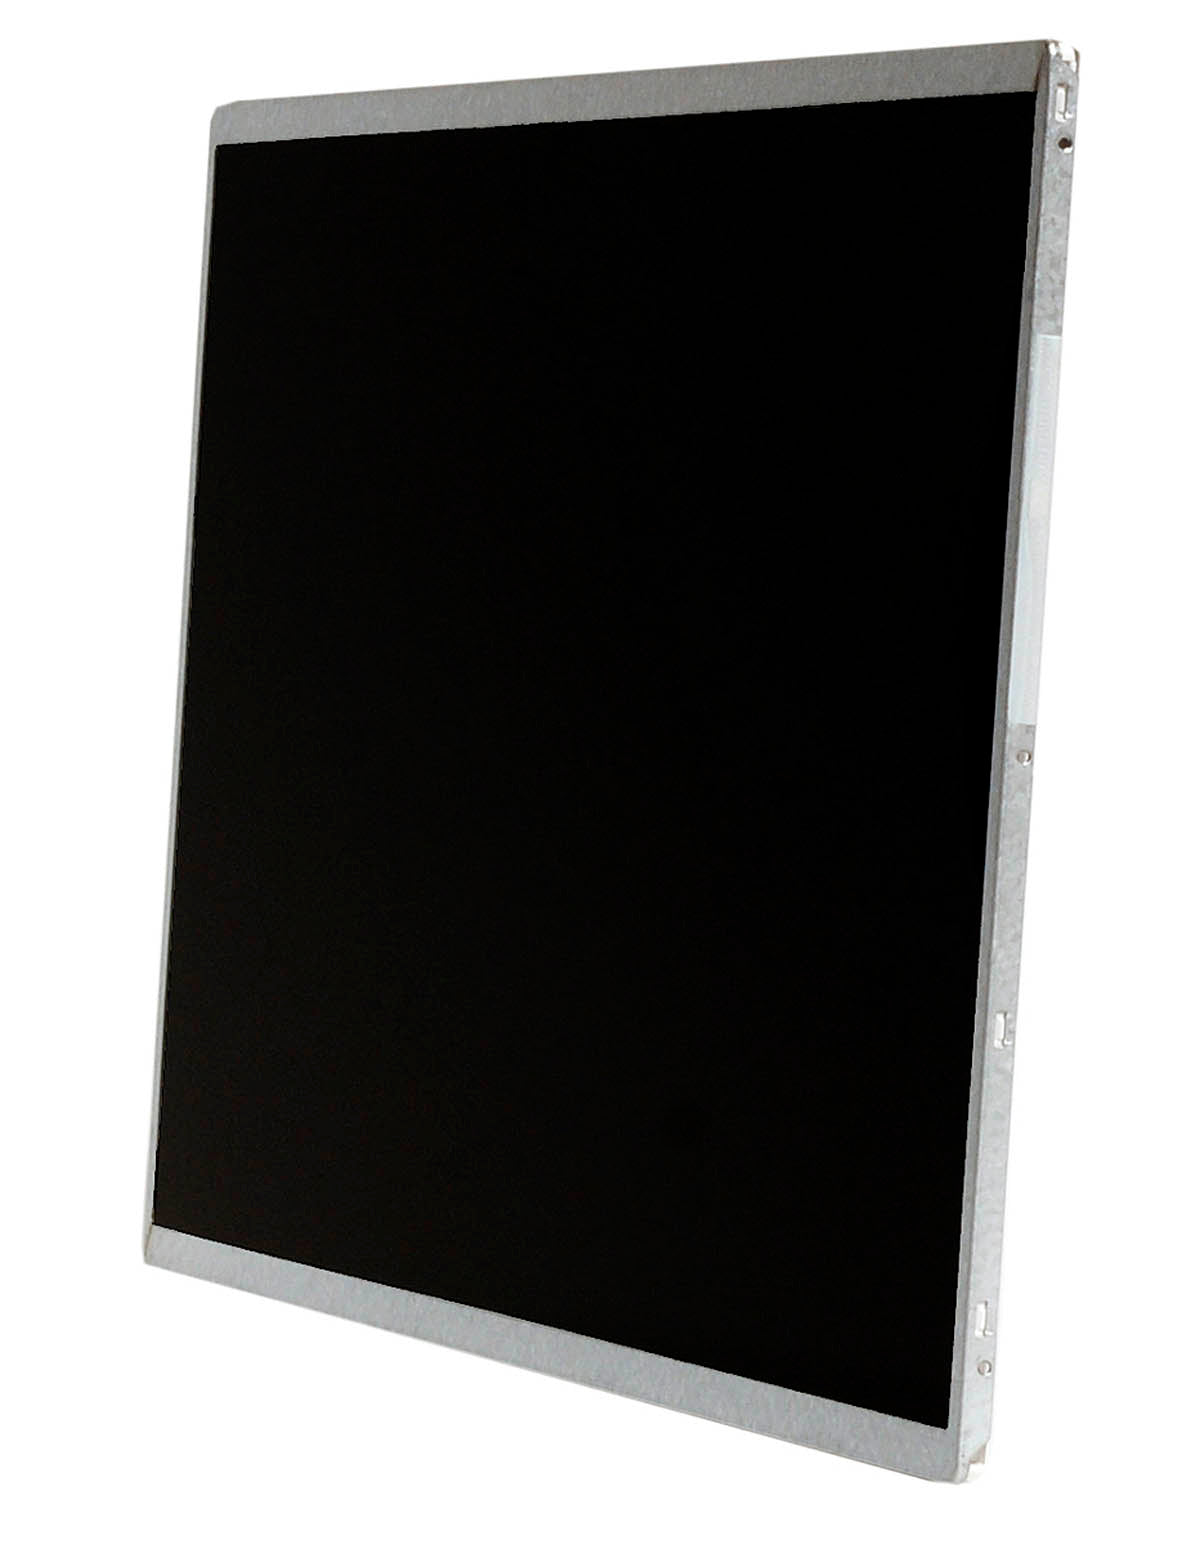 Replacement Screen For HSD140PHW1 HD 1366x768 Glossy LCD LED Display